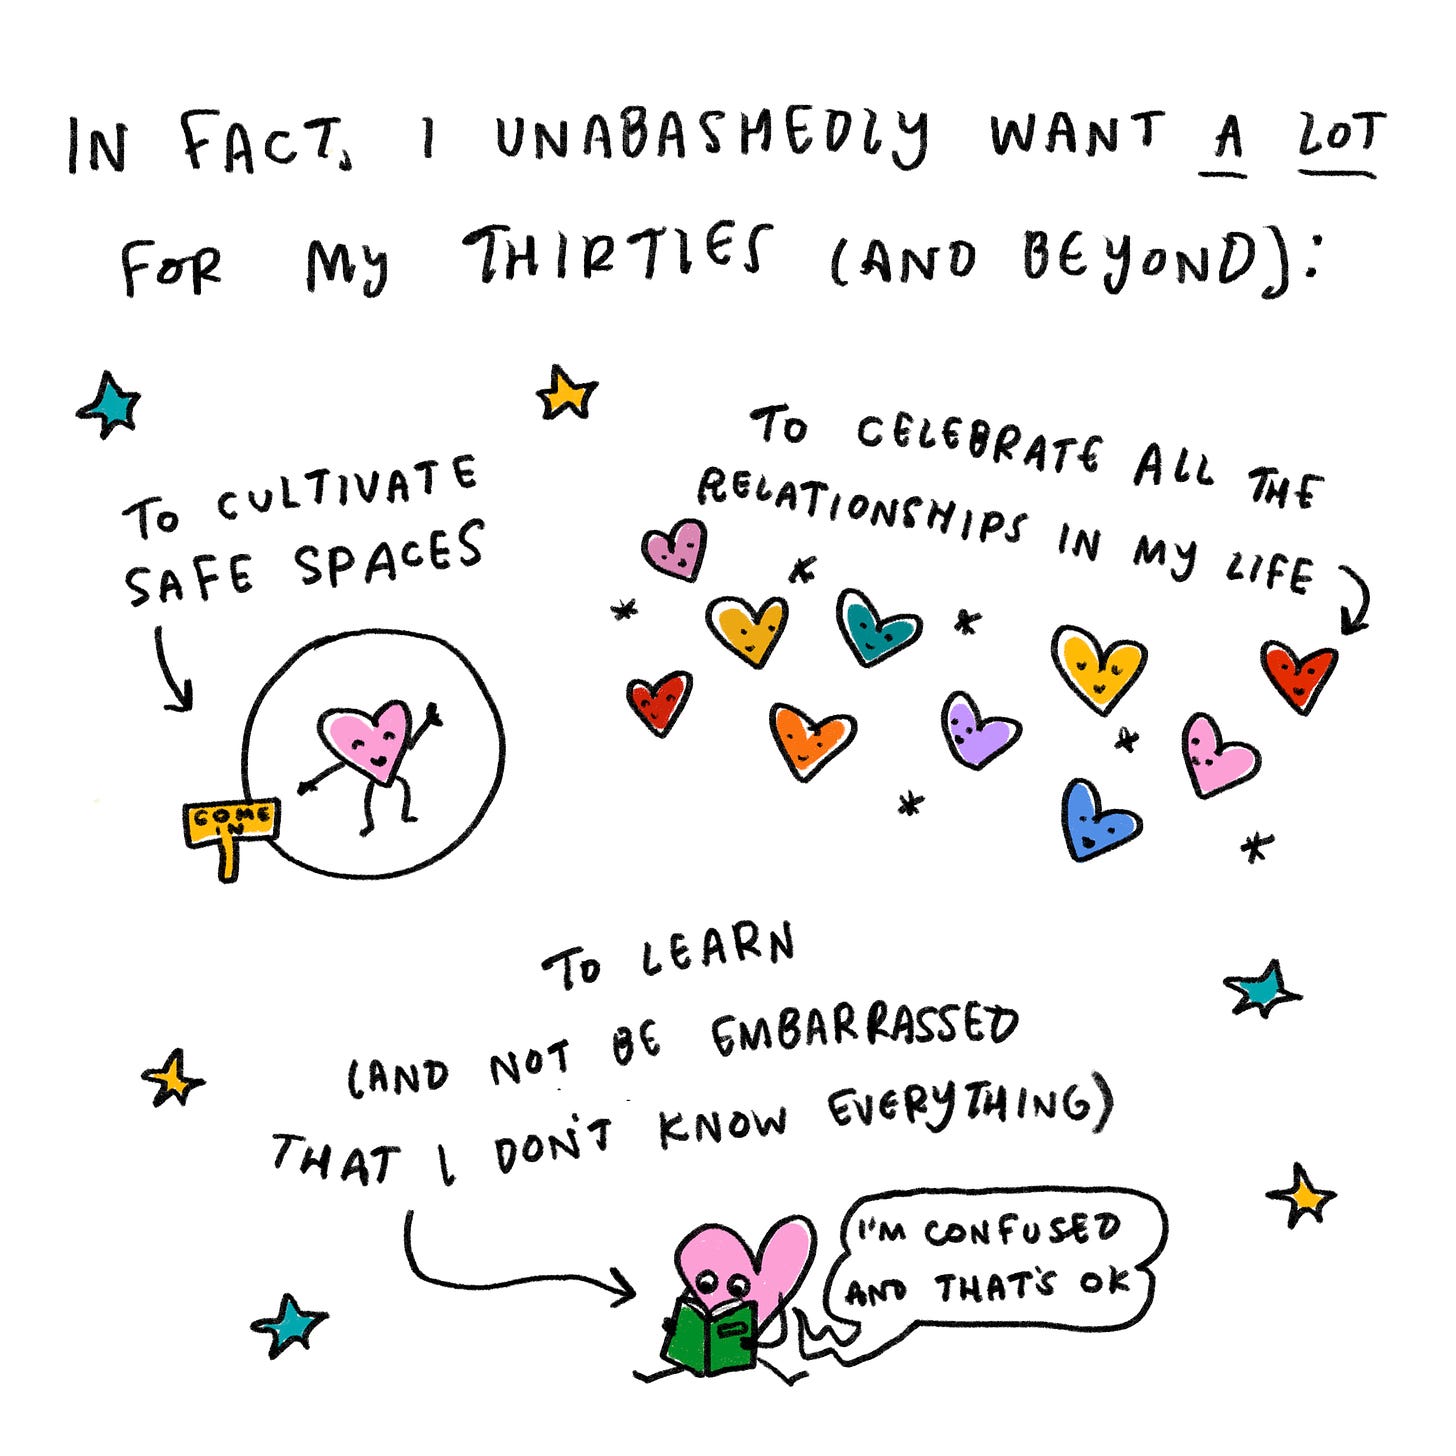 I want so much for my thirties (and beyond);  Cultivating safe spaces Celebrating different types of love (and trying to ascribe less to the traditional hierarchy of how love is distributed) Time with friends (duh!)